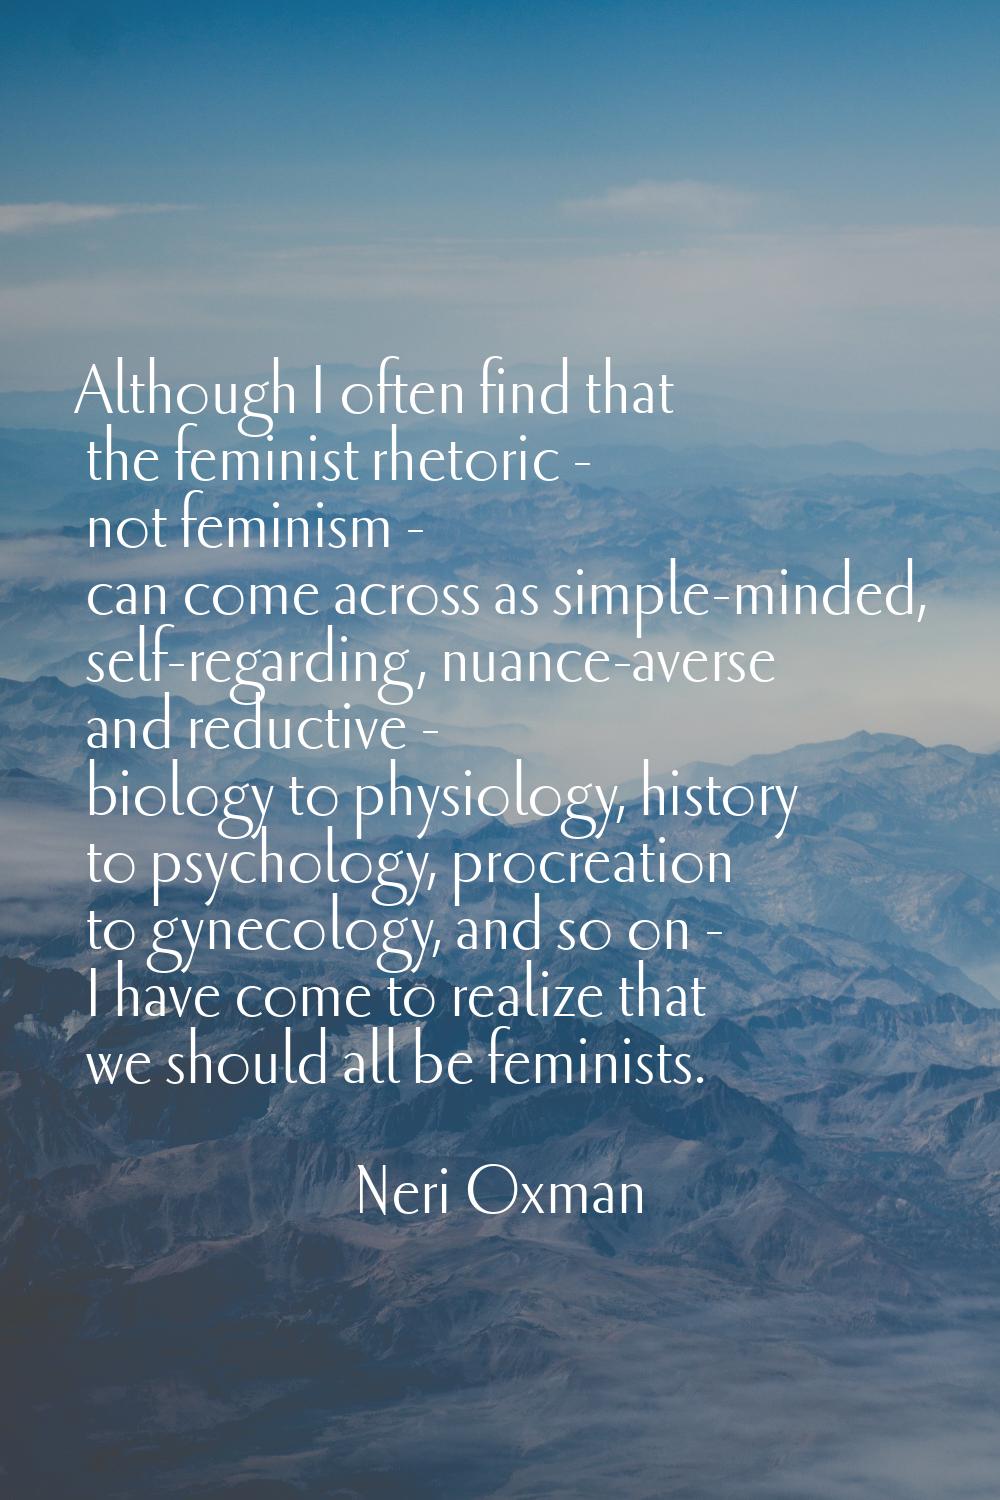 Although I often find that the feminist rhetoric - not feminism - can come across as simple-minded,